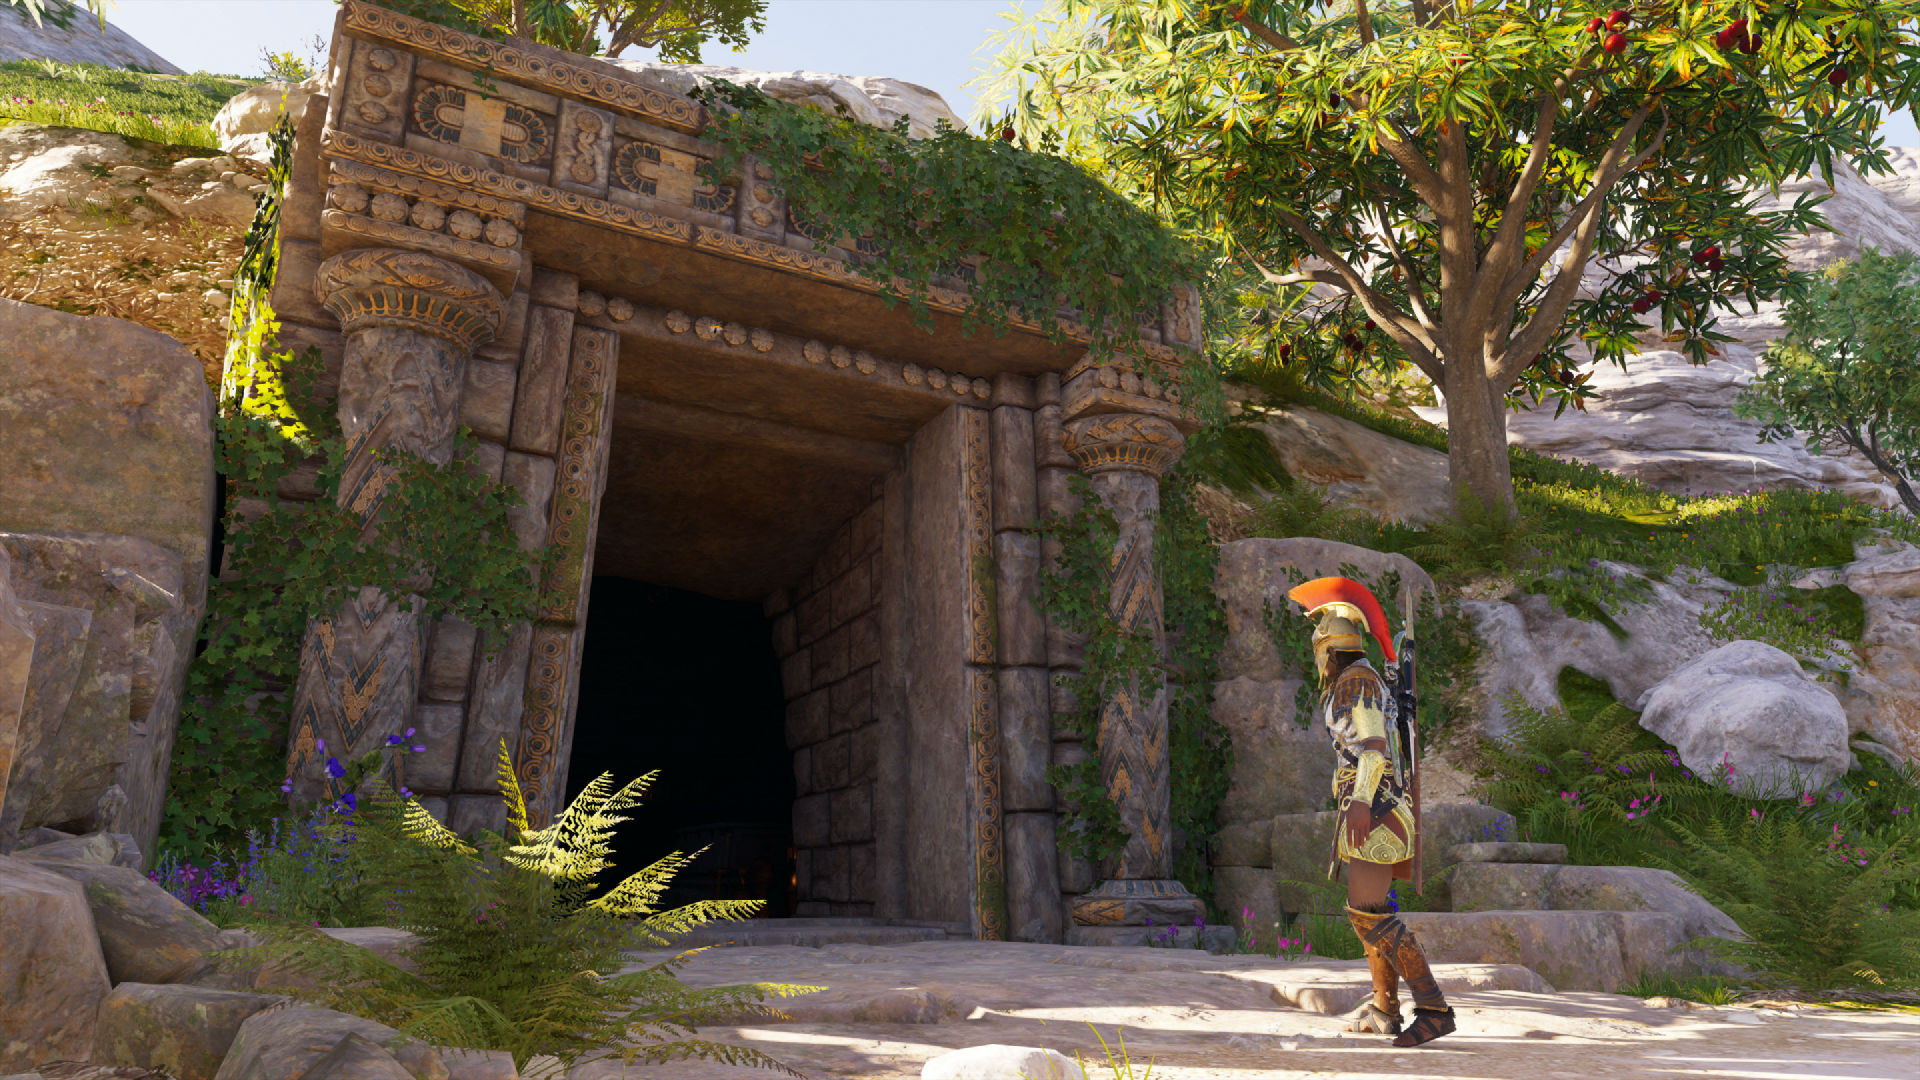 https://www.pcgamesn.com/wp-content/uploads/2018/10/All-Assassins-Creed-Odyssey-Tomb-locations-Ancient-Stele-guide.jpg